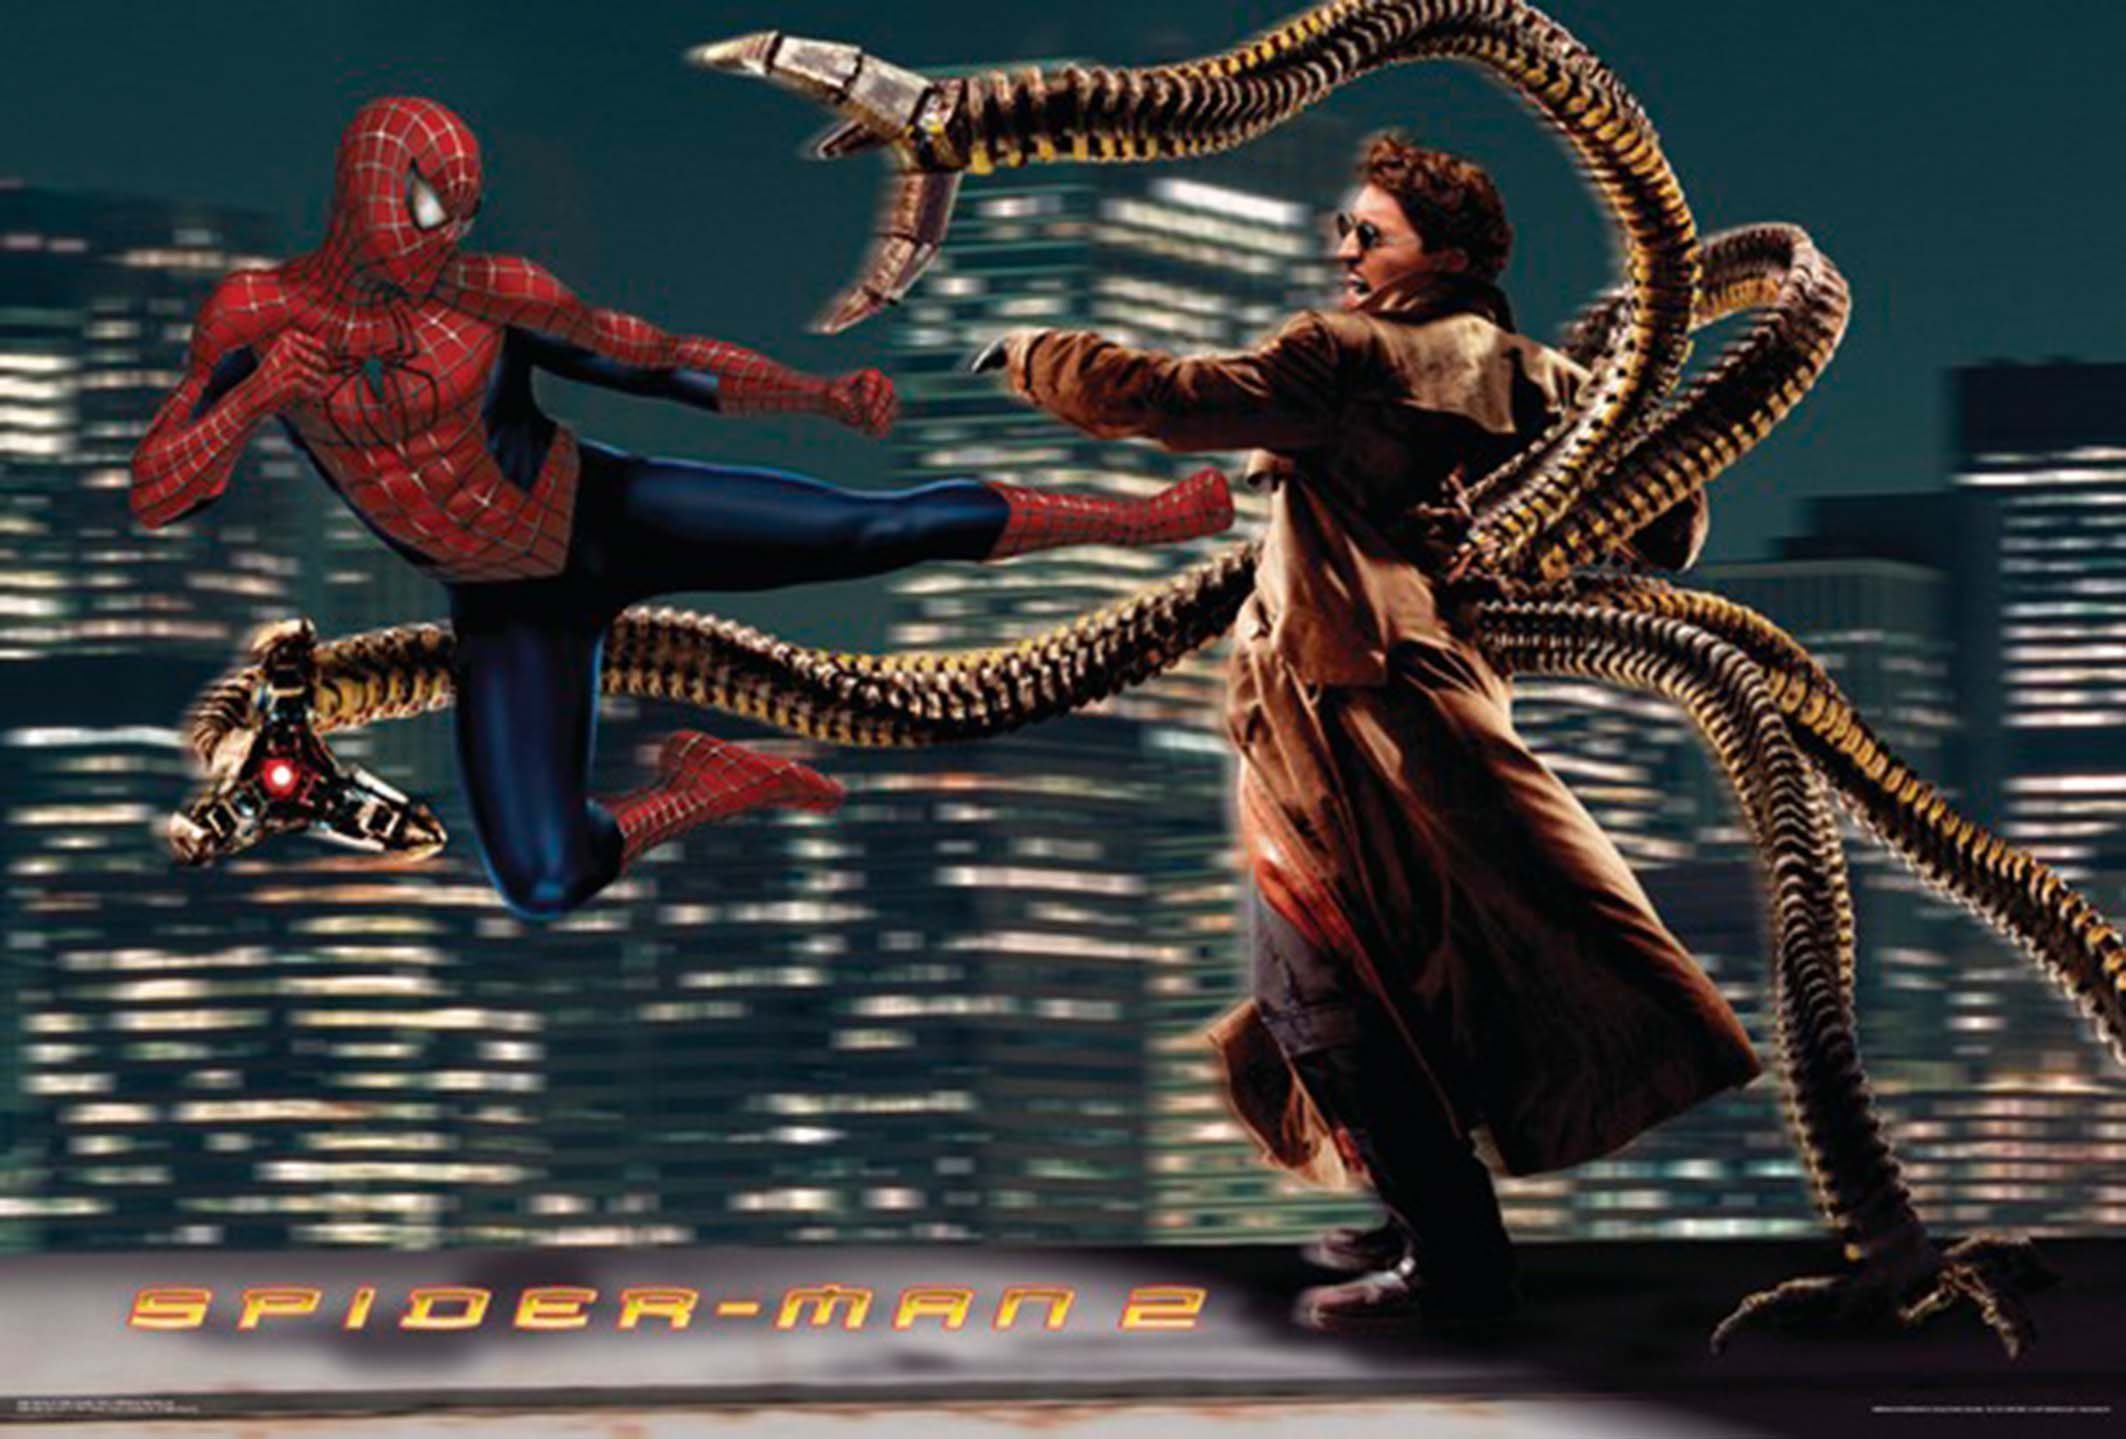 Close Up Poster SpiderMan 2 Poster 68,5 x 101,6 cm